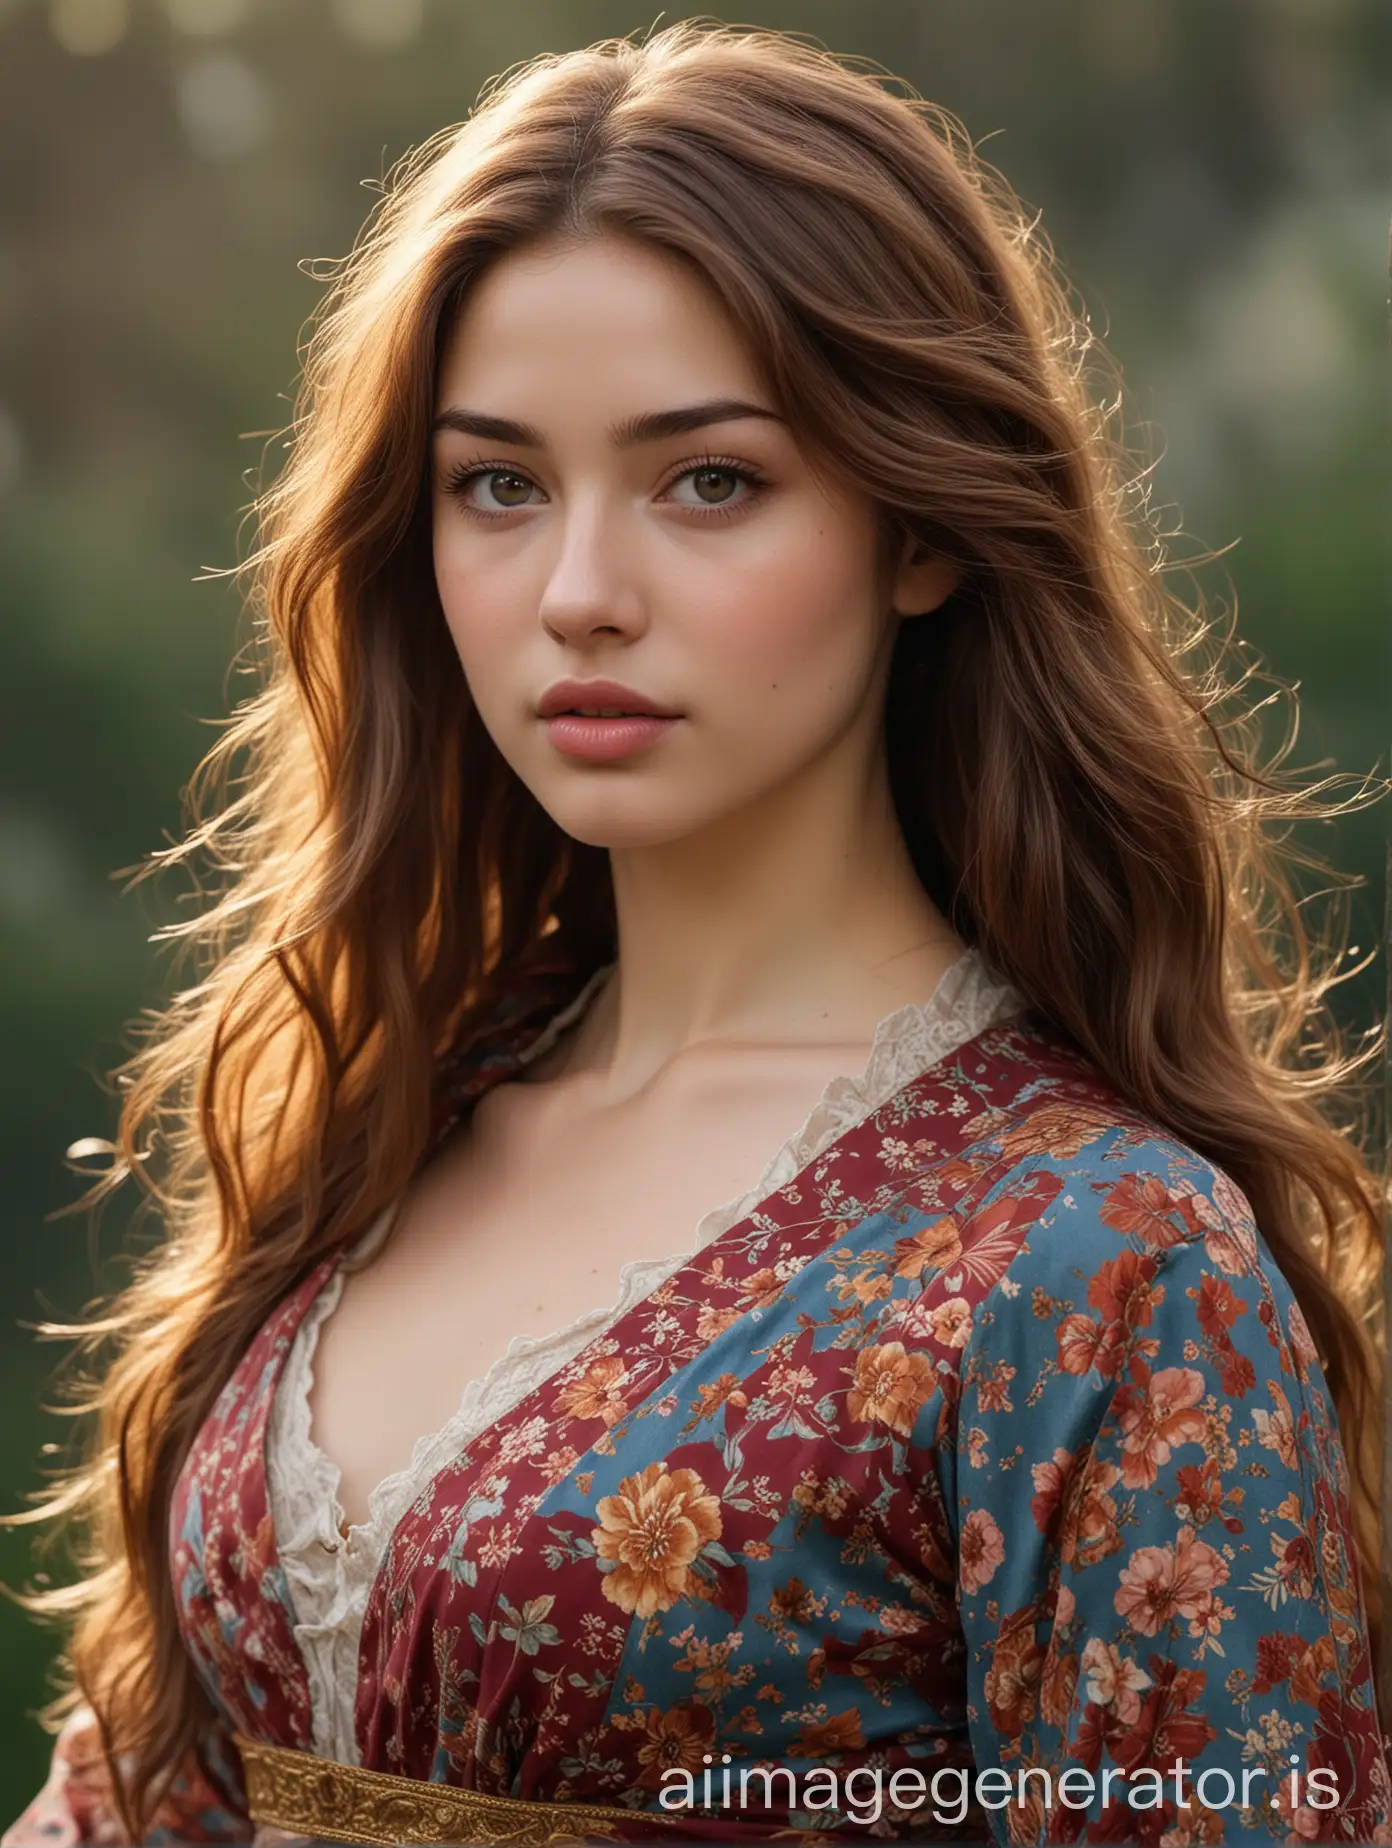 A slim but curvy girl, her face is oval with a prominent jawline, small but plumpy peach lips and fair-brown skin, auburn wavy long hair and sparkling eyes, one eye blue another eye grey, less-exposed sharp collar bone in maroon long-floral dress, showing her hourglass body.She is 5'4" tall with slender yet strong arms holding a sword, looking ferocious, gracious, beautiful and royal. Her facial features are overall soft, glowy and dewy.